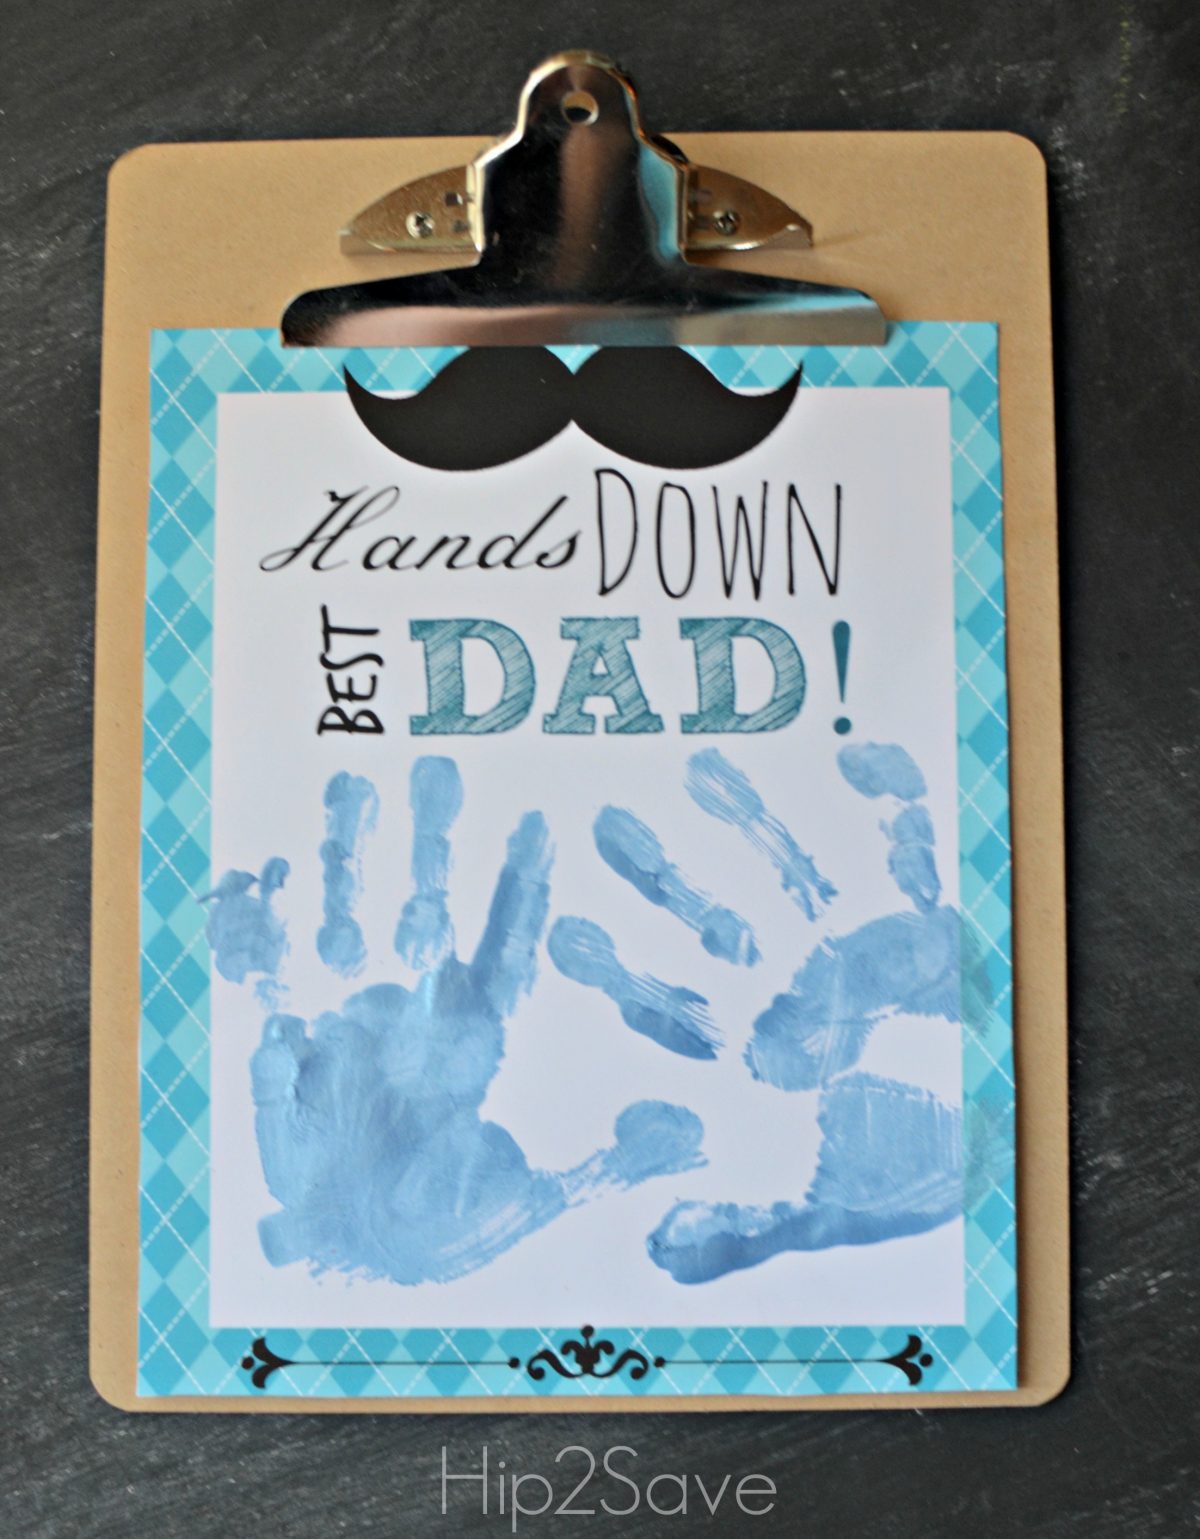 Hands Down Best Dad Free Printable is one of our FREE Fathers Day Cards